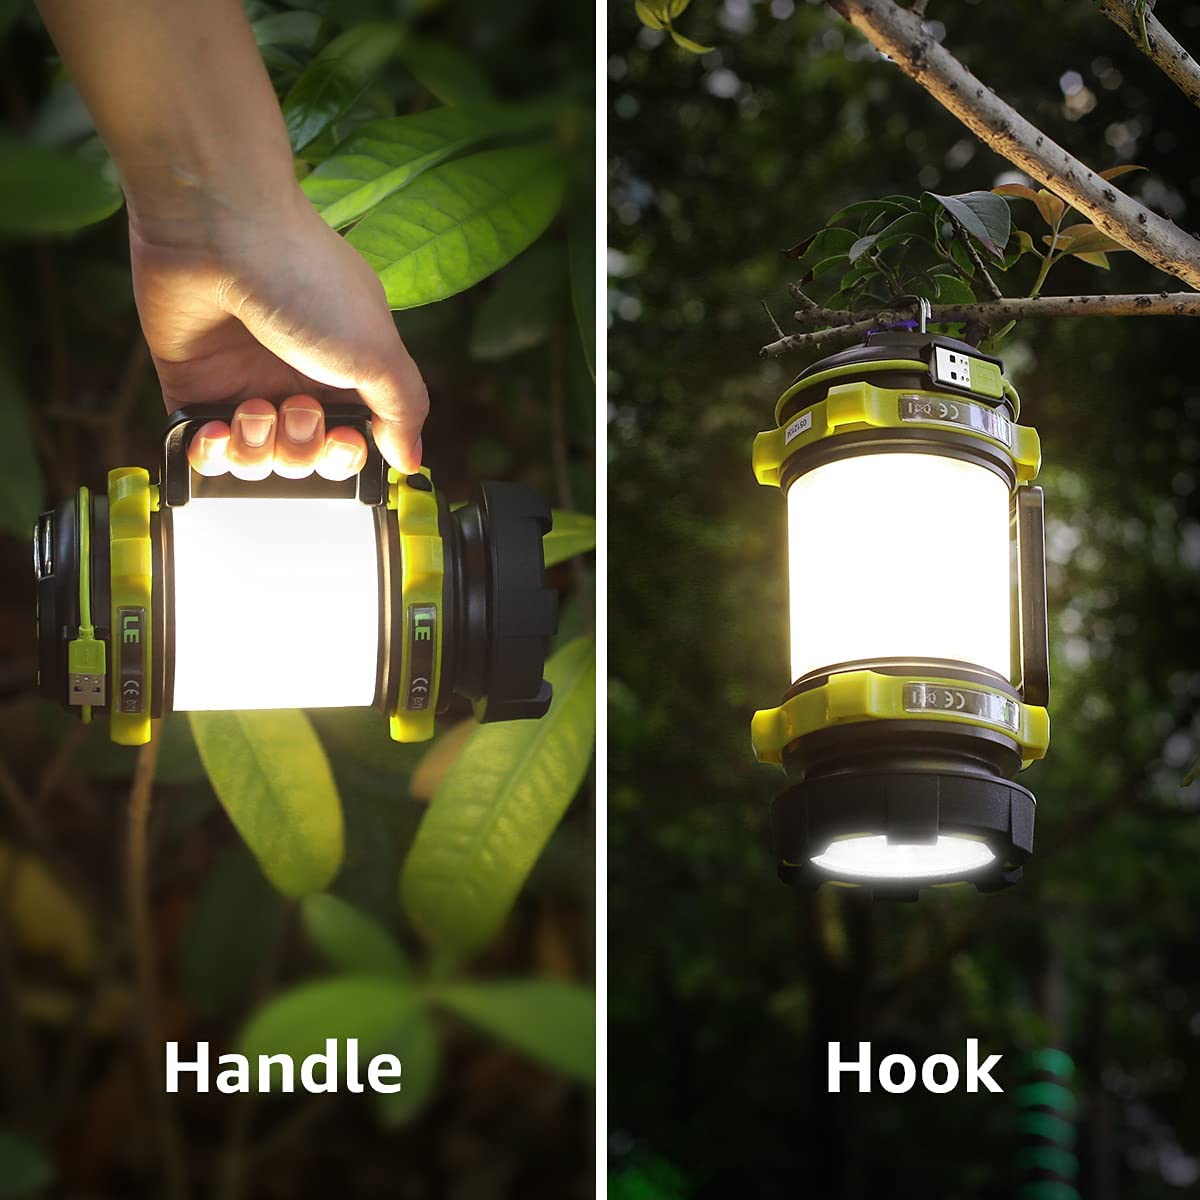 Camping Lantern Rechargeable Brightest Flashlight with 500LM 6 Light Modes 2600mAh Power Bank IPX4 Waterproof Perfect for Hurricane Emergency, Outdoor, Hiking and Home, USB Cable